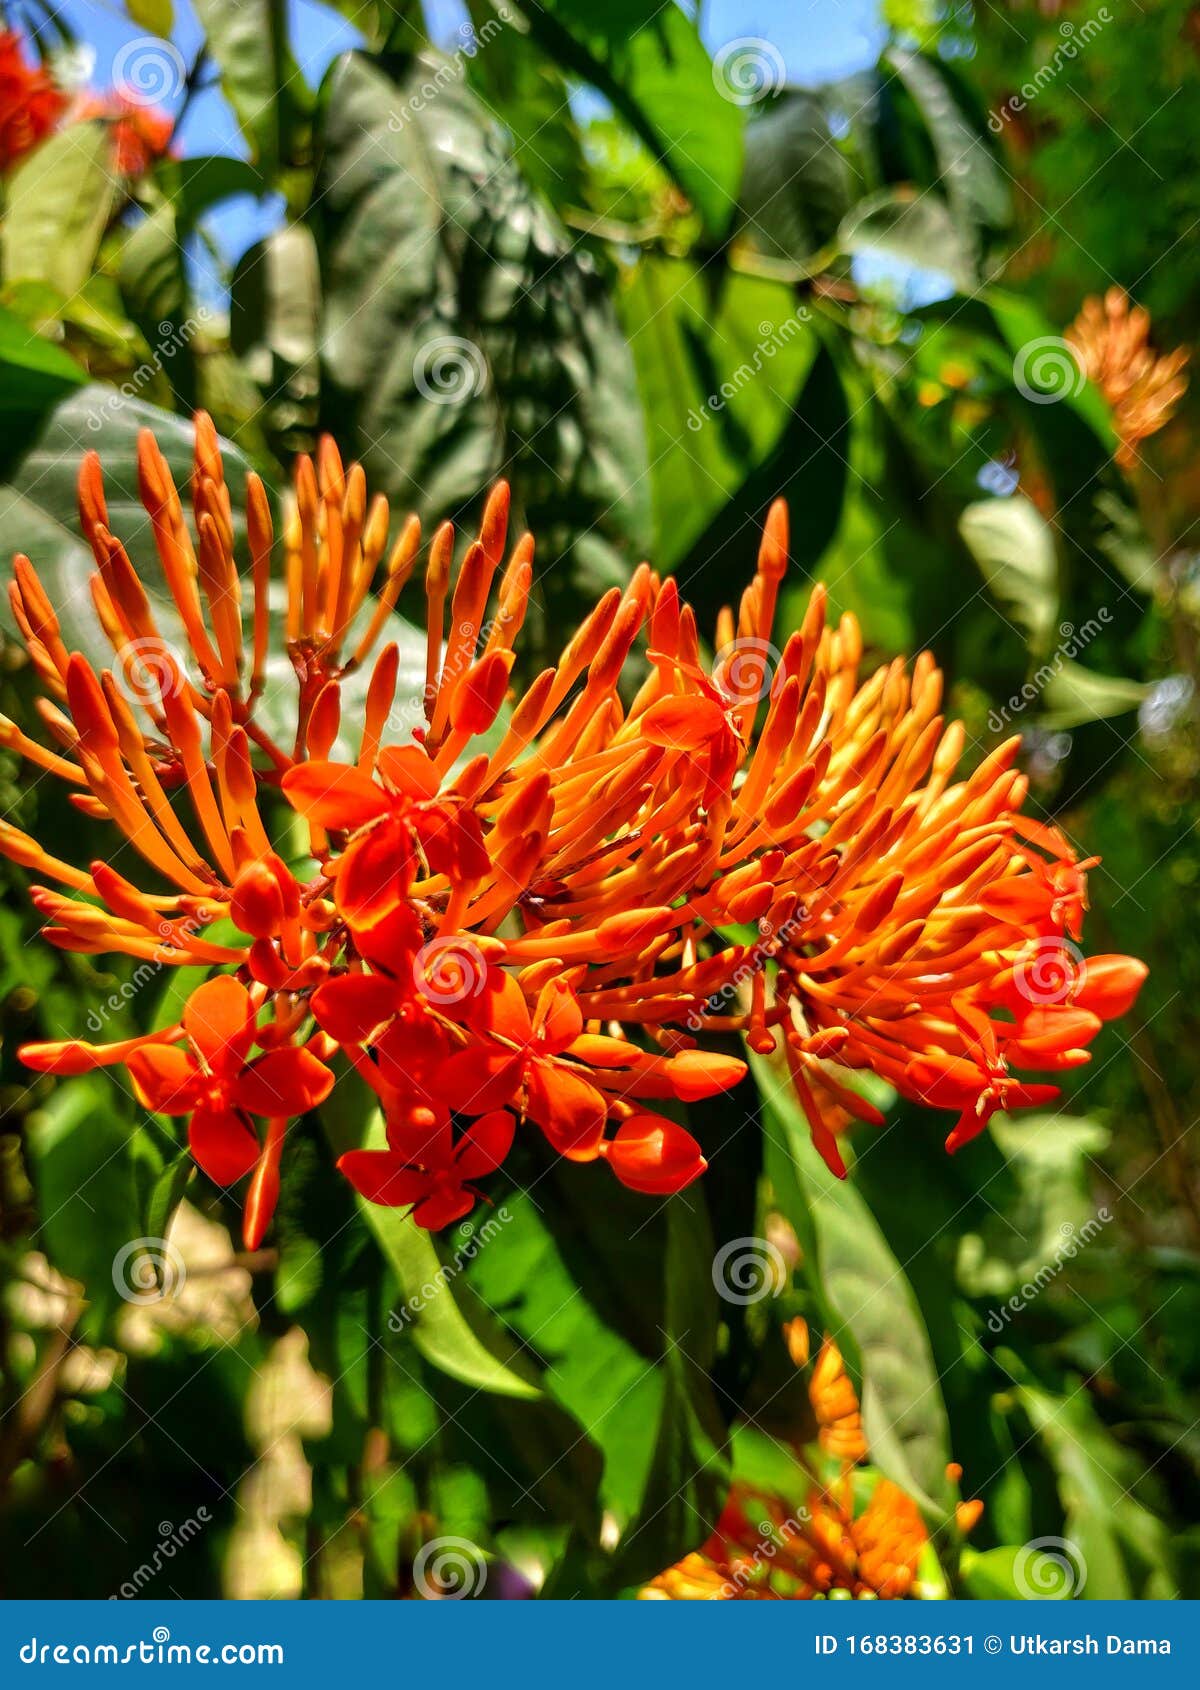 Beautiful Orange Four Petal Flower With Same Other Flower Before The